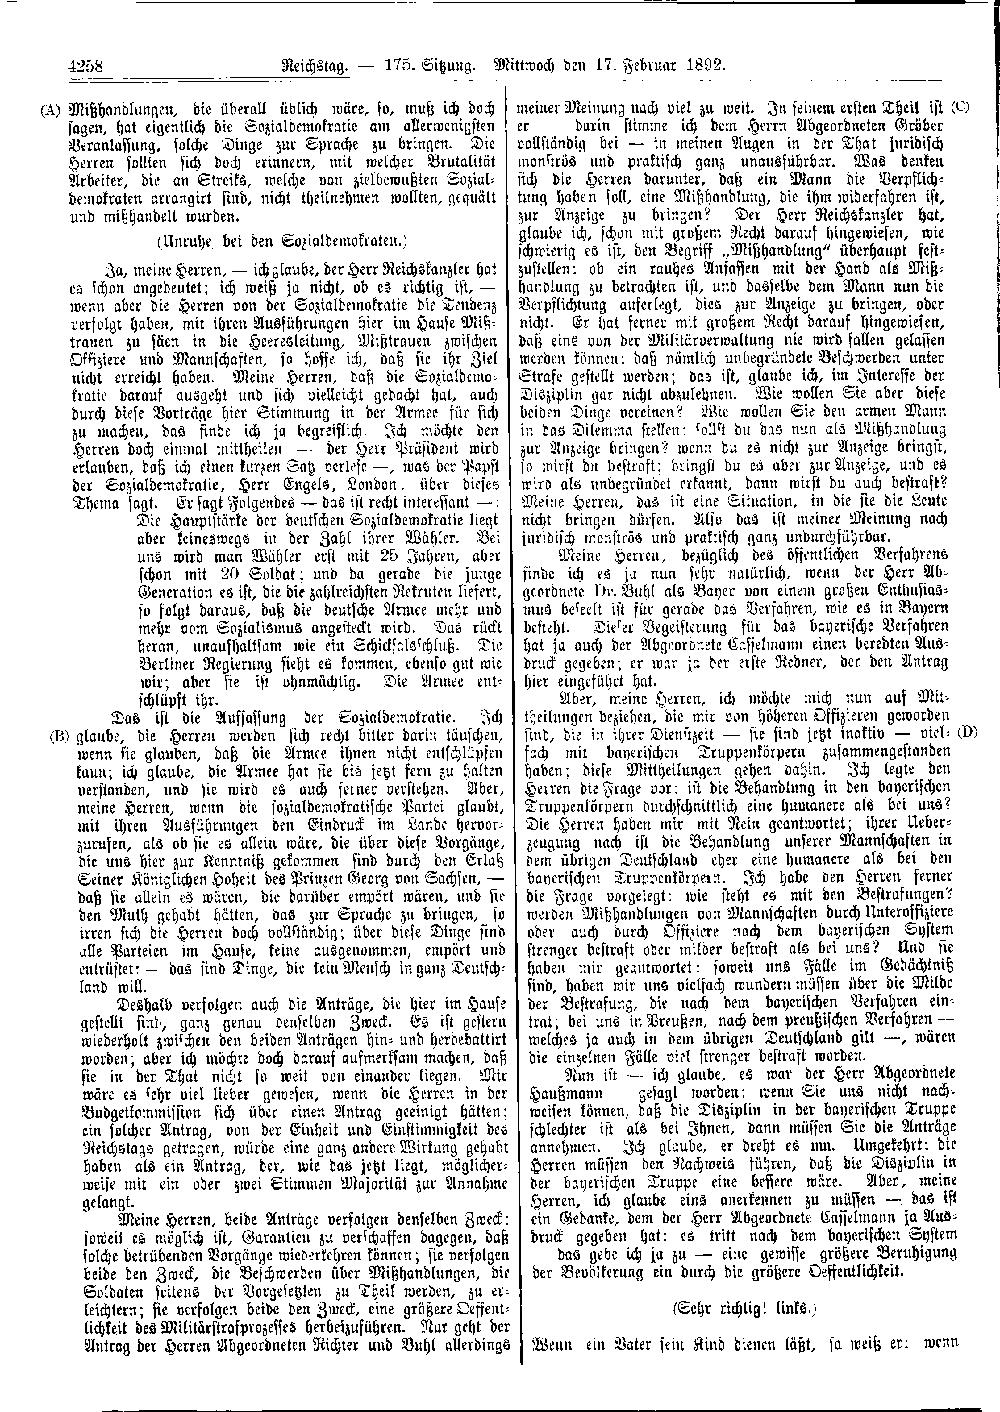 Scan of page 4258